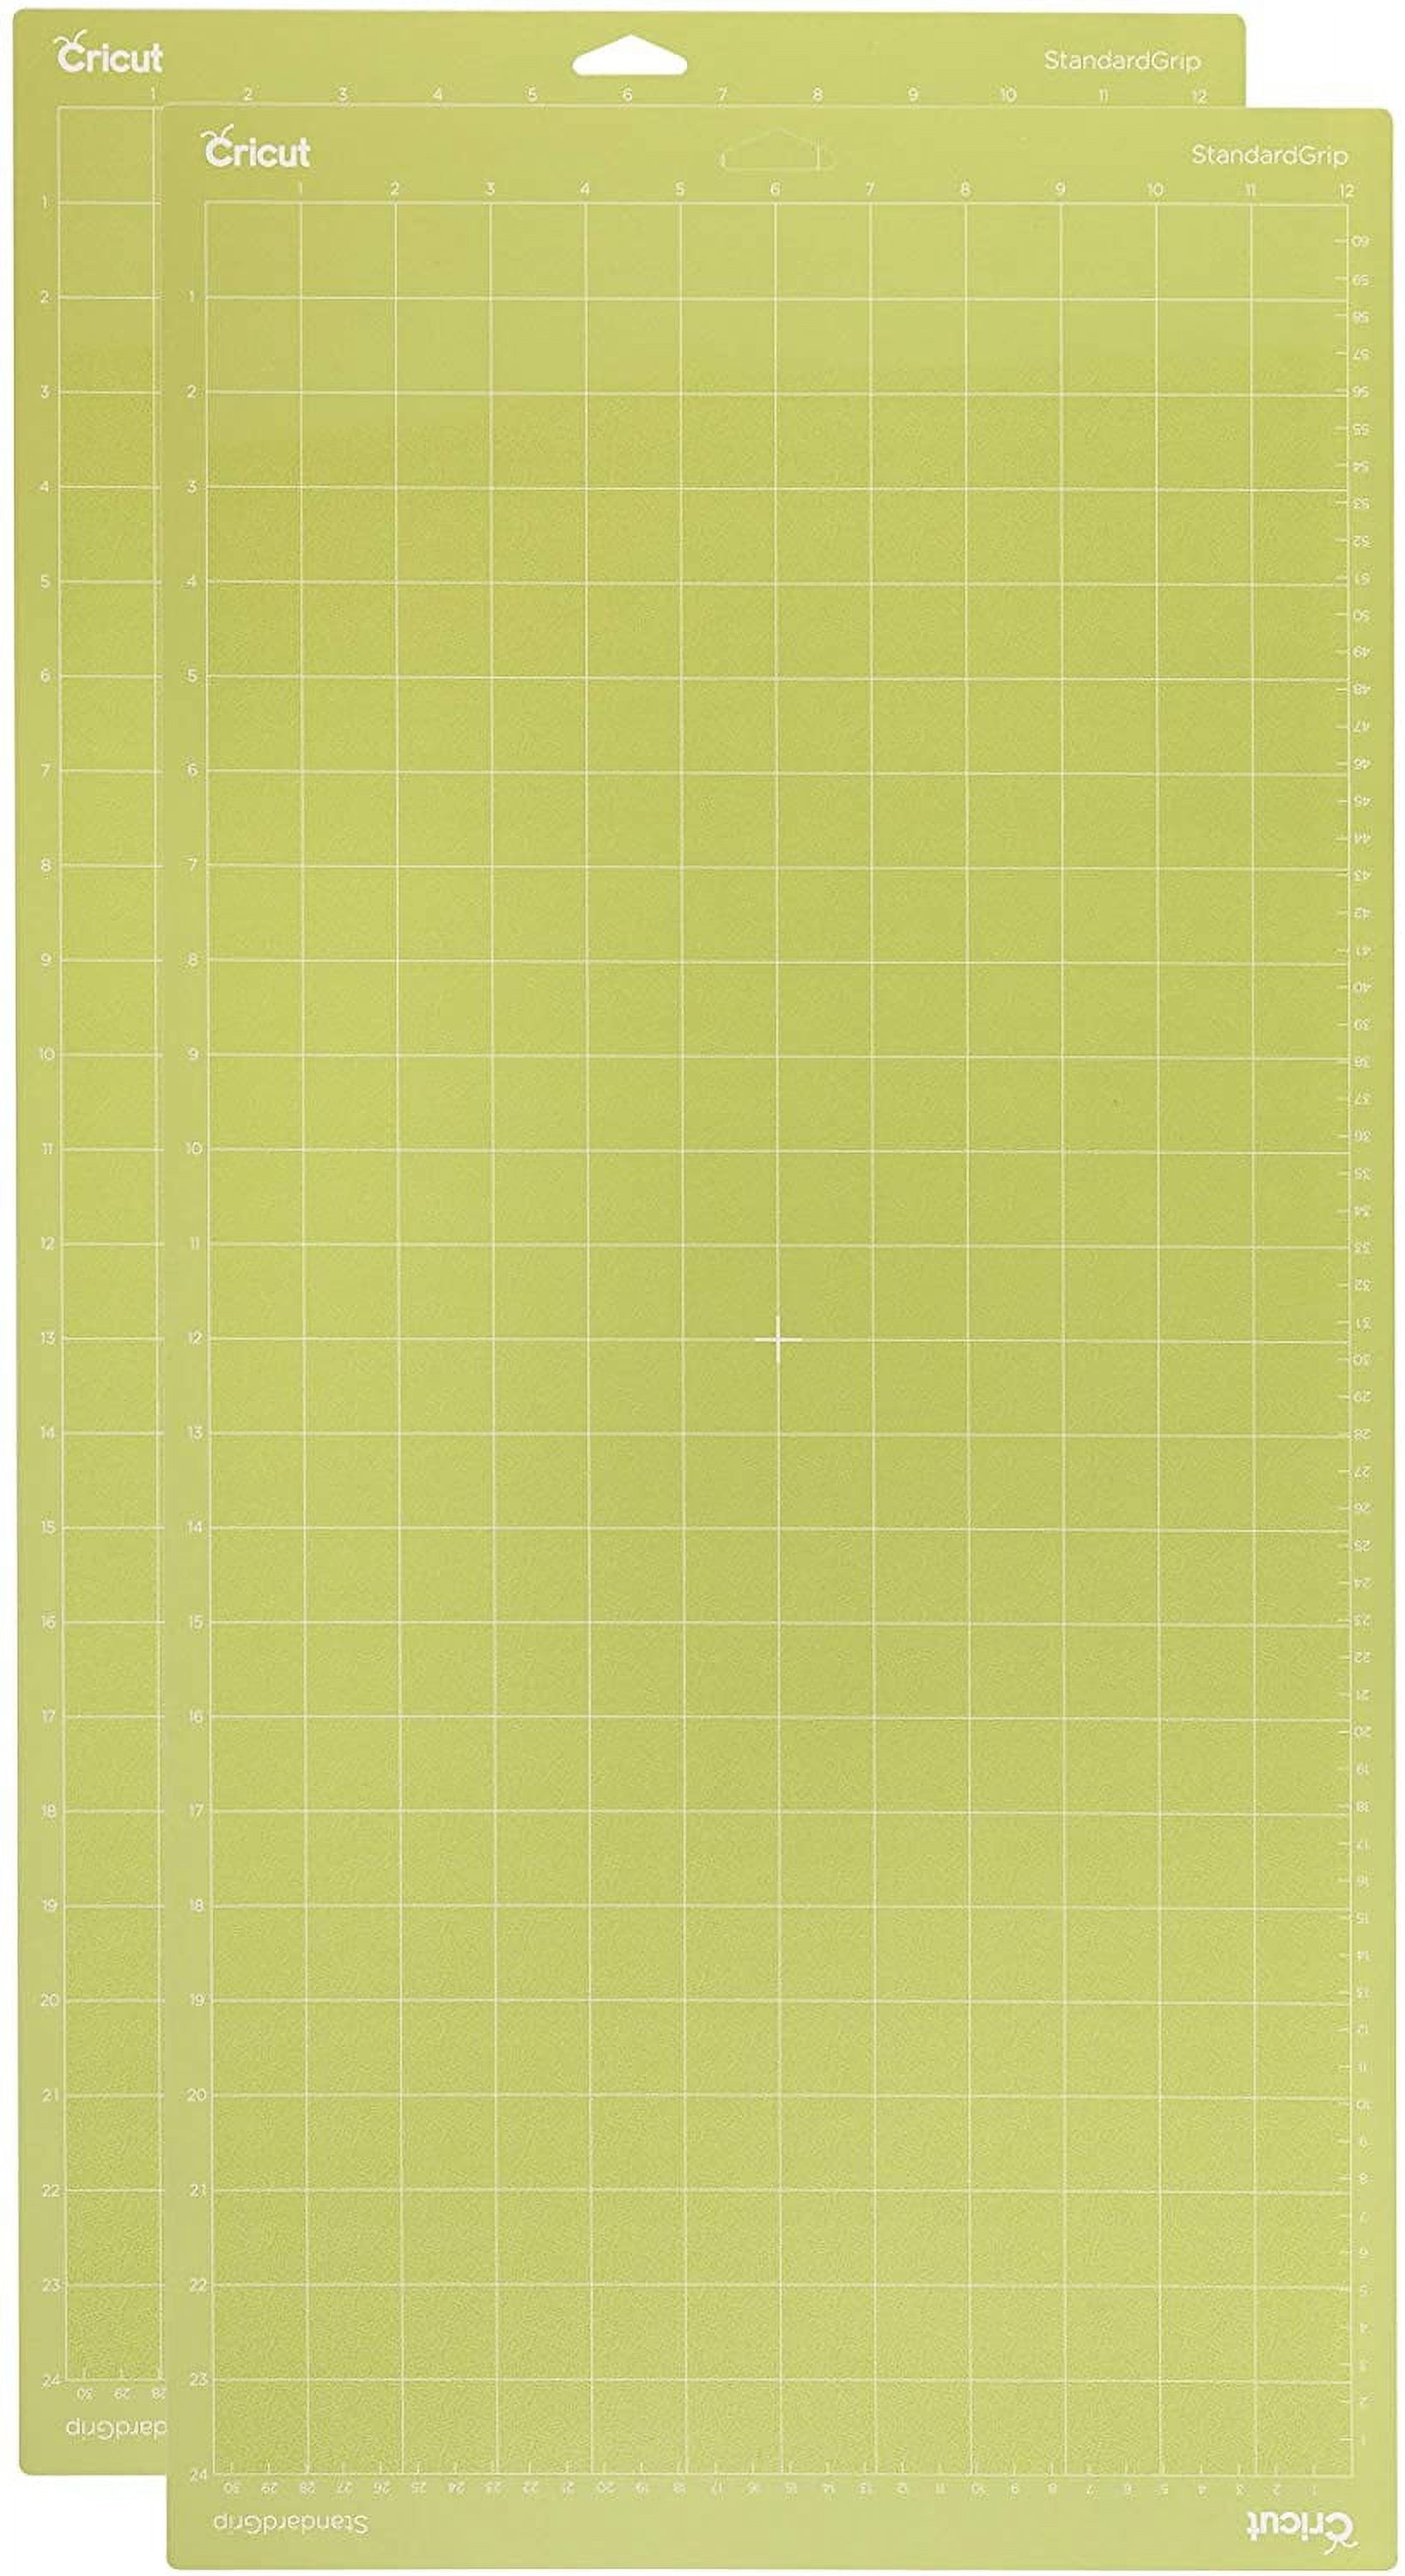  Cricut StandardGrip Machine Mats 12in x 24in, Reusable Cutting  Mats for Crafts with Protective Film, Use with Cardstock, Vinyl and More,  Compatible with Cricut Explore & Maker, (Green, 3 Count)